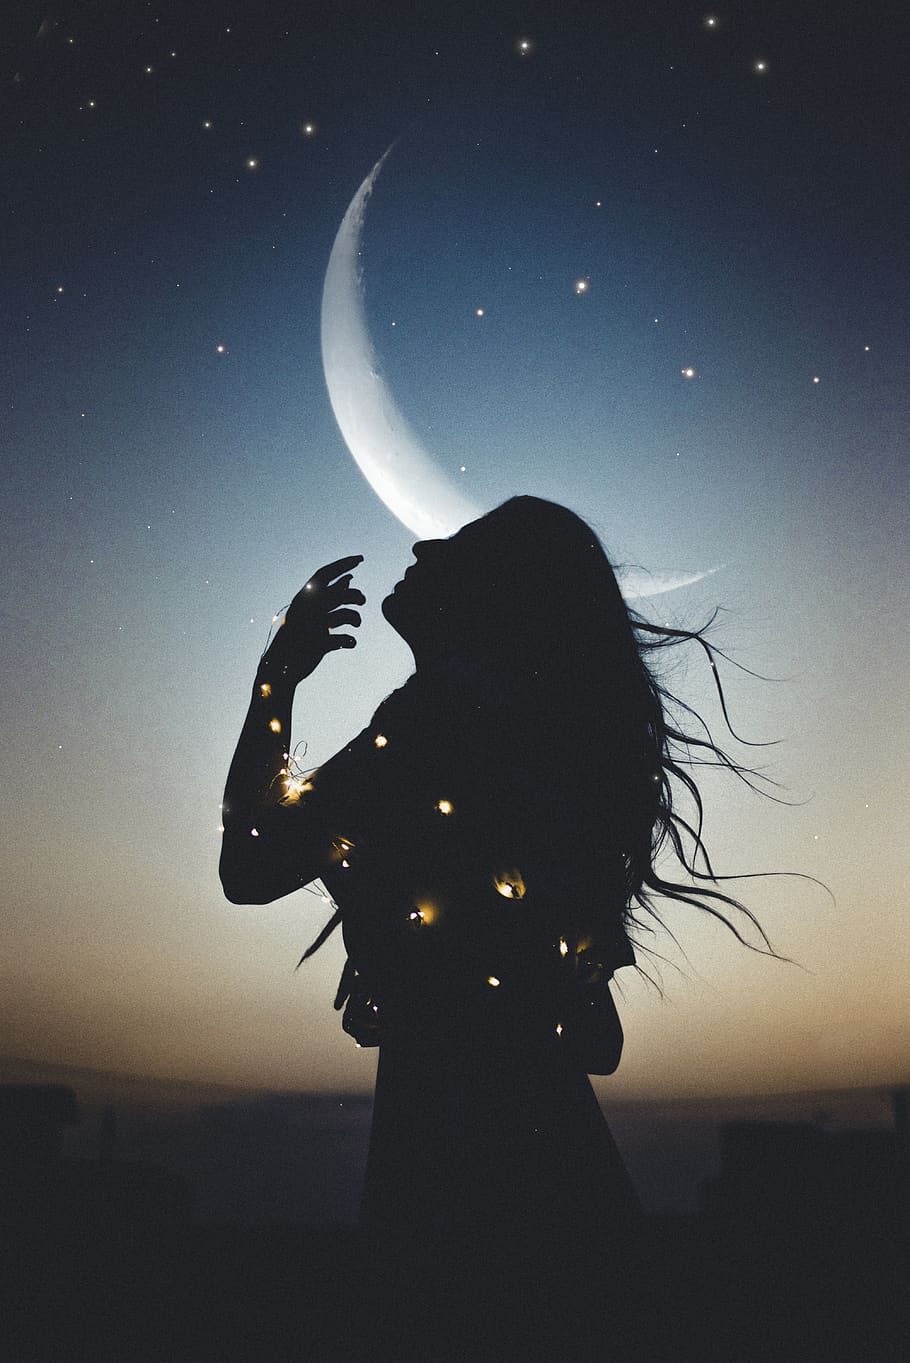 Silhouette Photo of Woman, art, astrology, astronomy, backlit